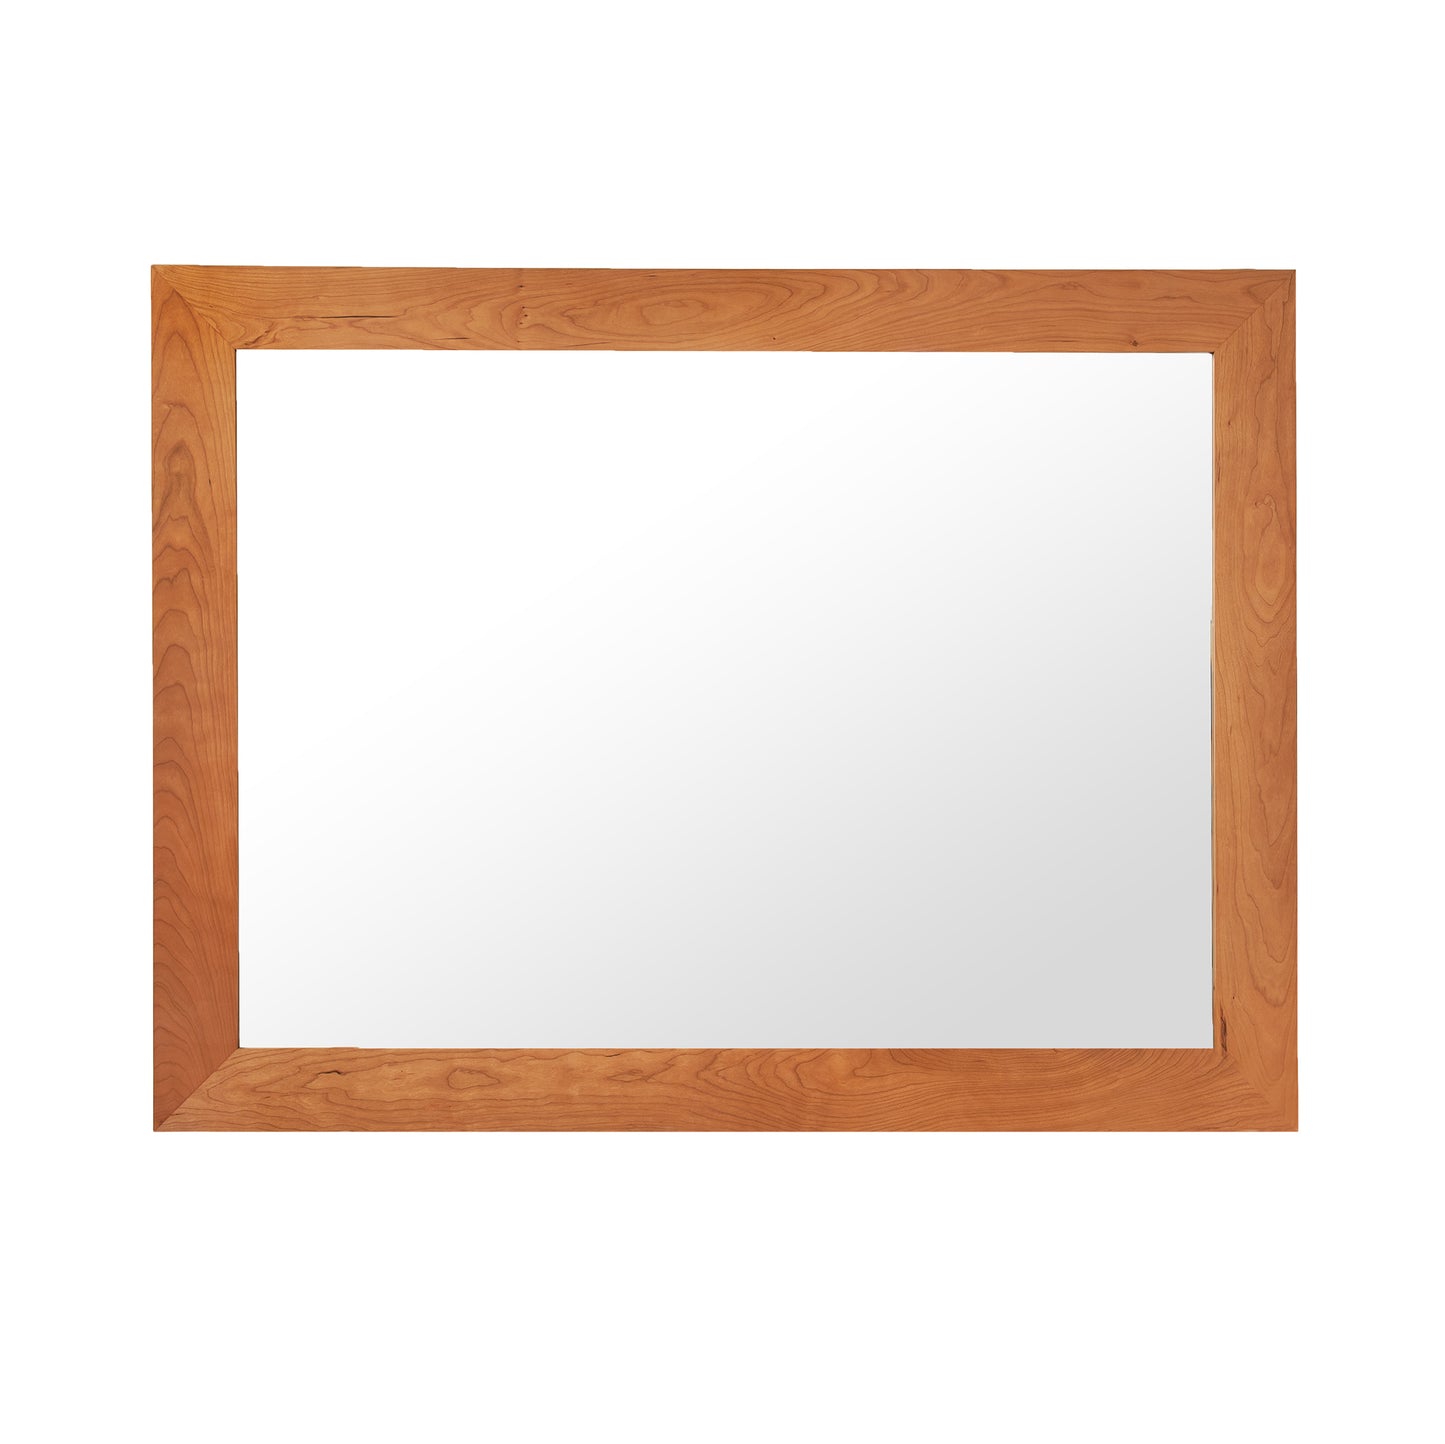 A Lyndon Furniture American Country Mirror with a solid wood framed accent mirror on a white background.